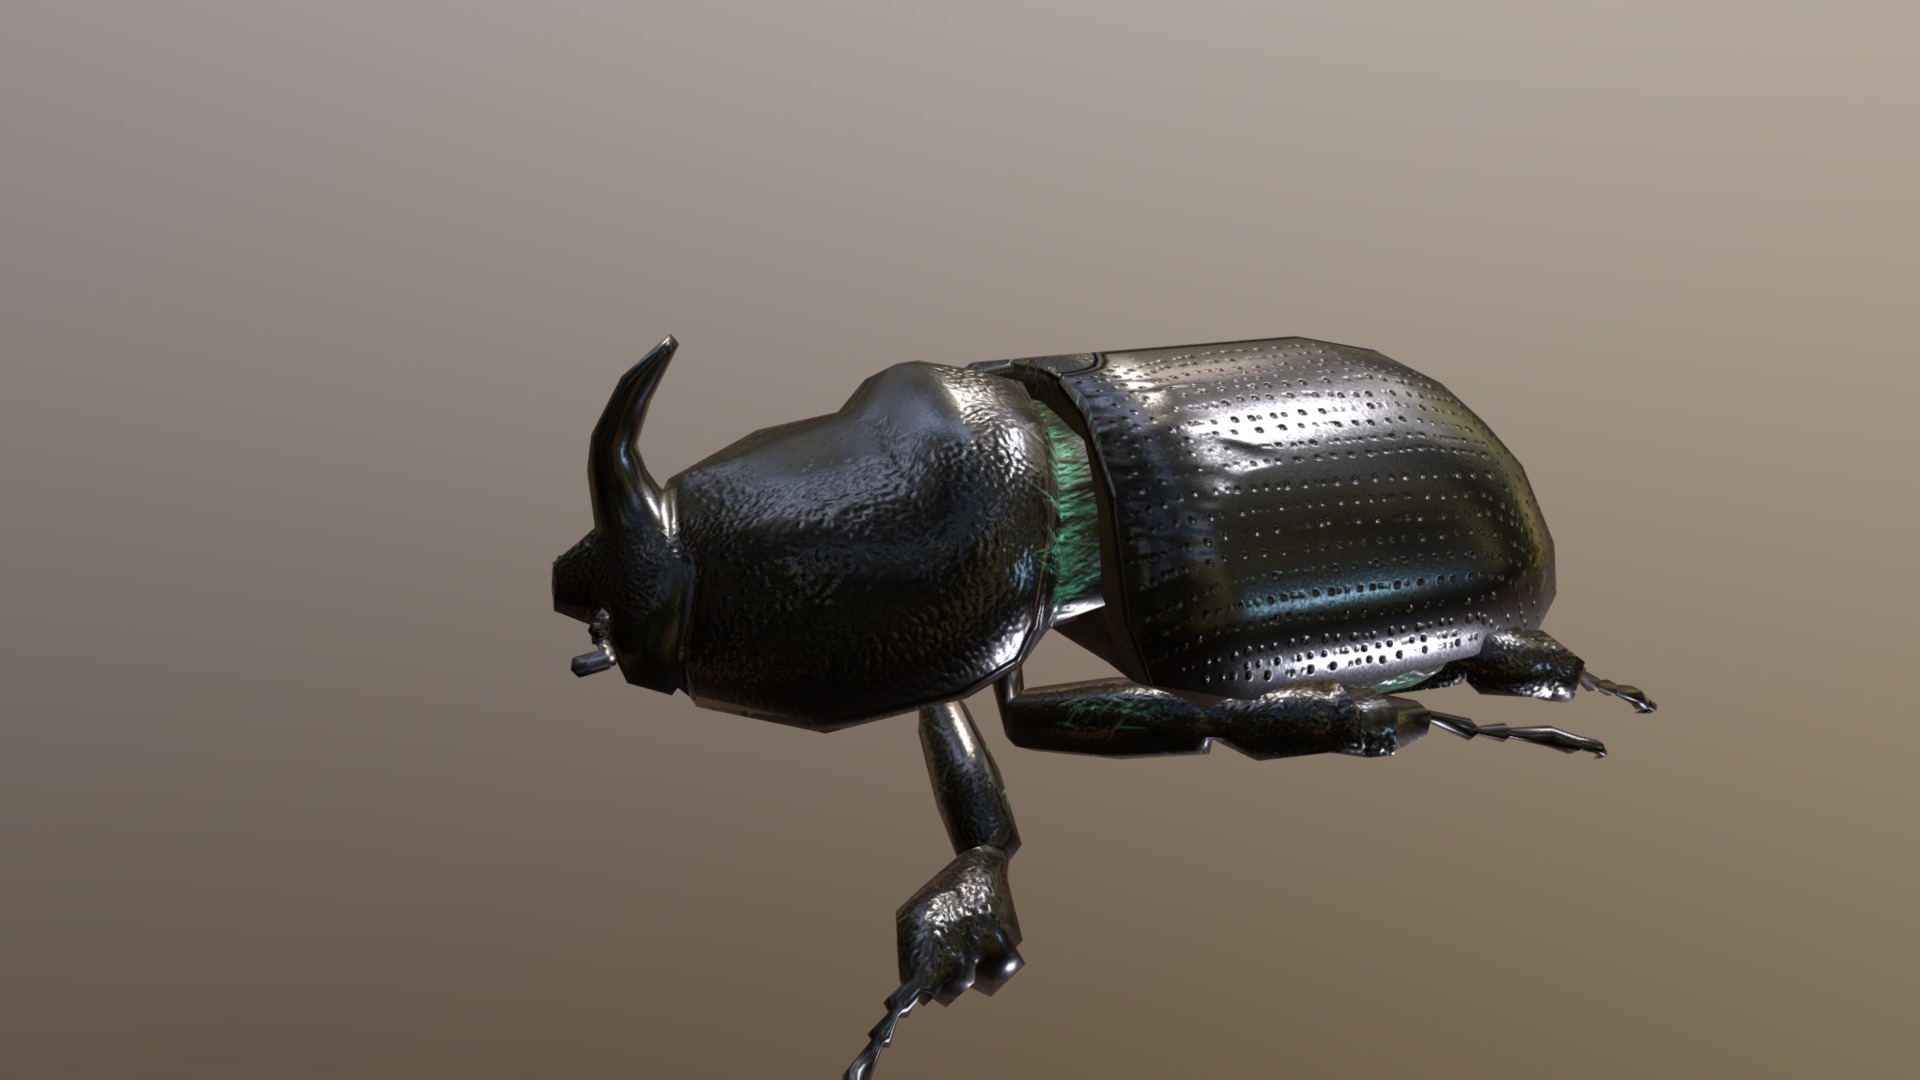 3D model Beetle – Oryctes Nasicornis - This is a 3D model of the Beetle - Oryctes Nasicornis. The 3D model is about a black and green beetle.